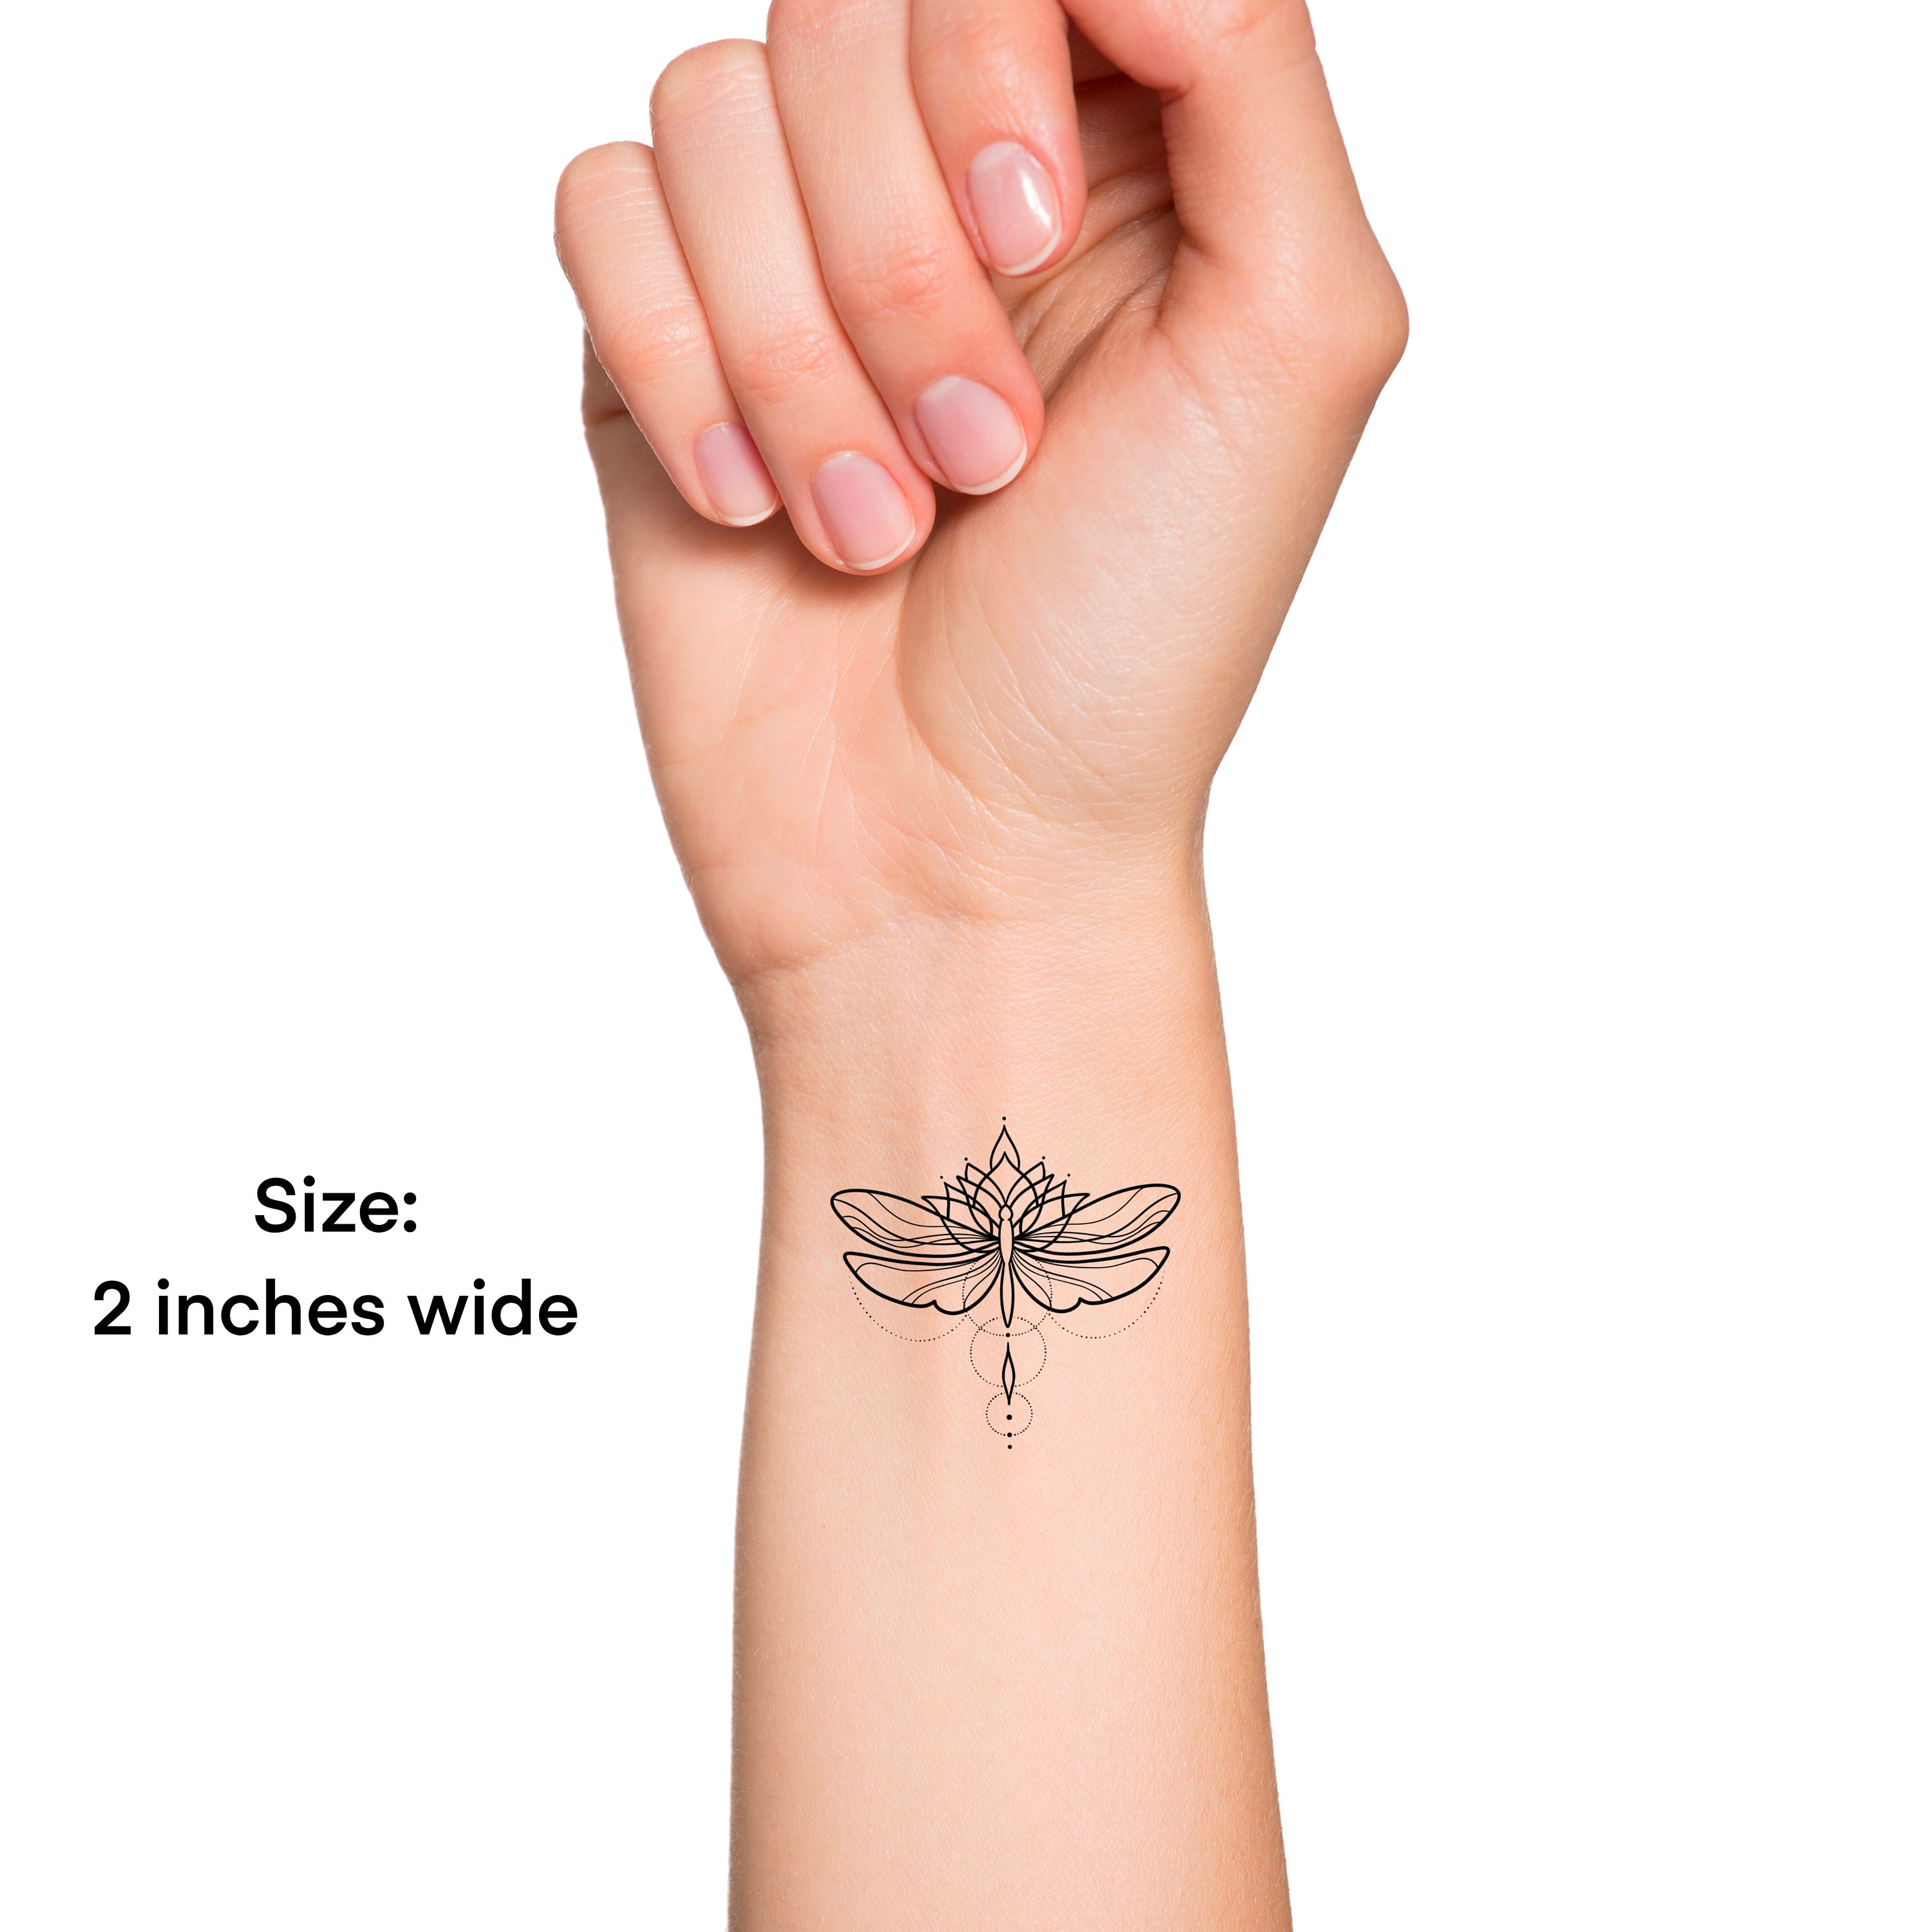 Dragonfly tattoo by ailanor on DeviantArt